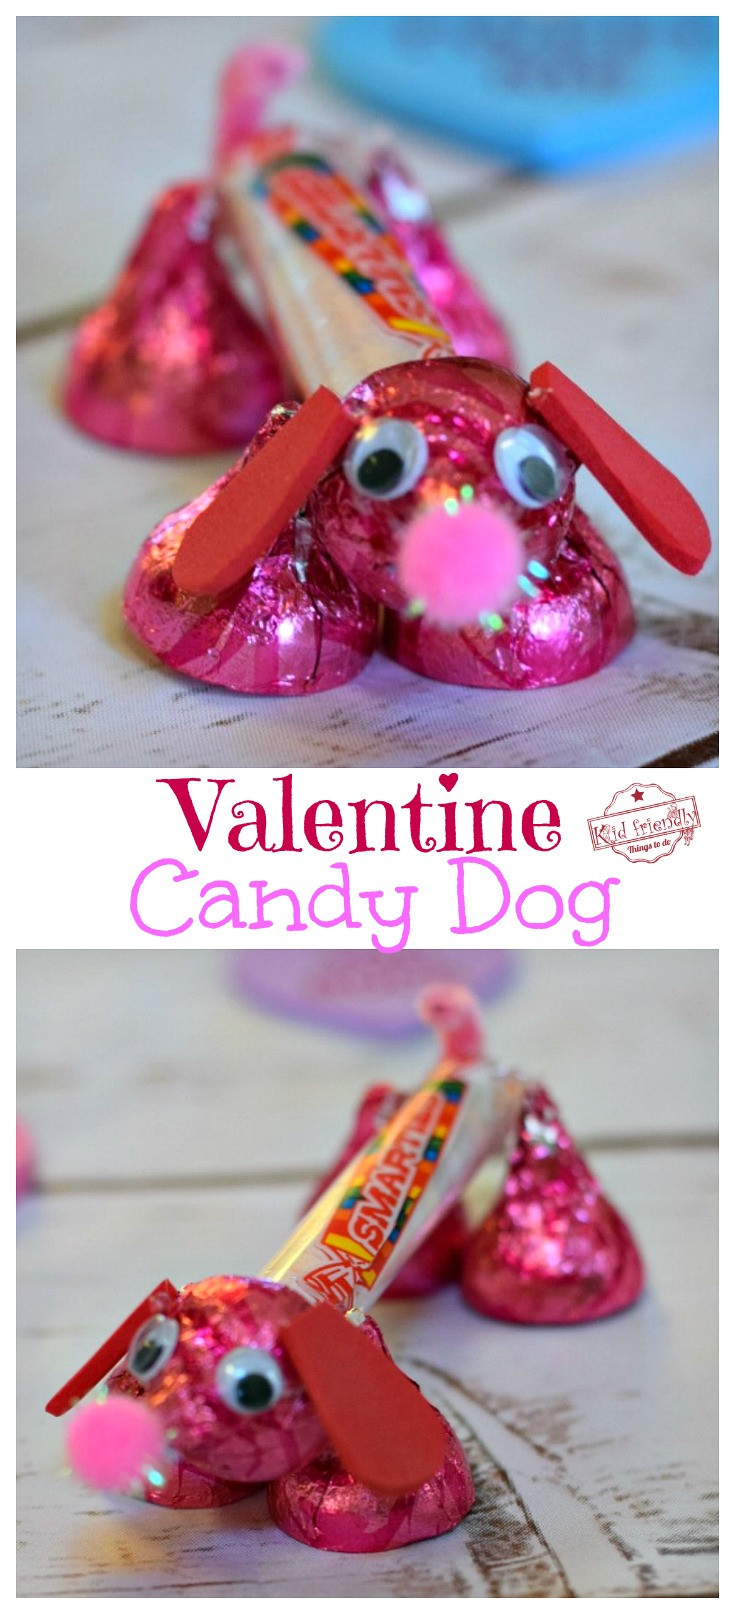 Valentines Day Candy Crafts Unique Make A Valentine S Candy Dog for A Fun Kid S Craft and Treat